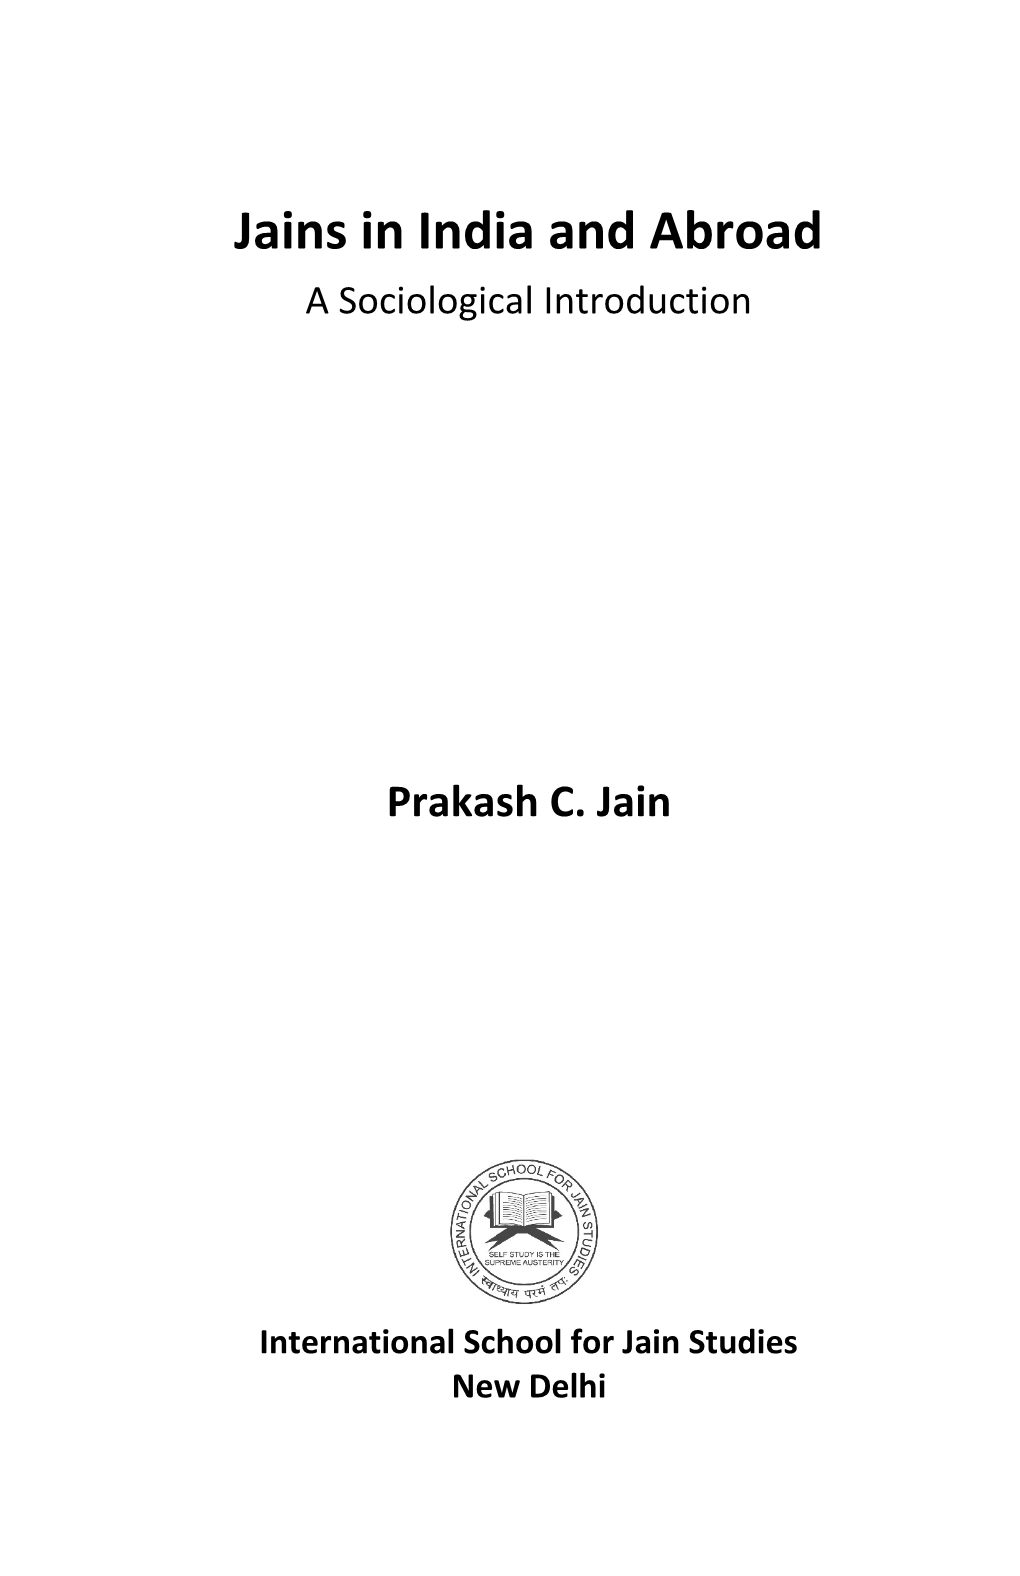 Jains in India and Abroad a Sociological Introduction